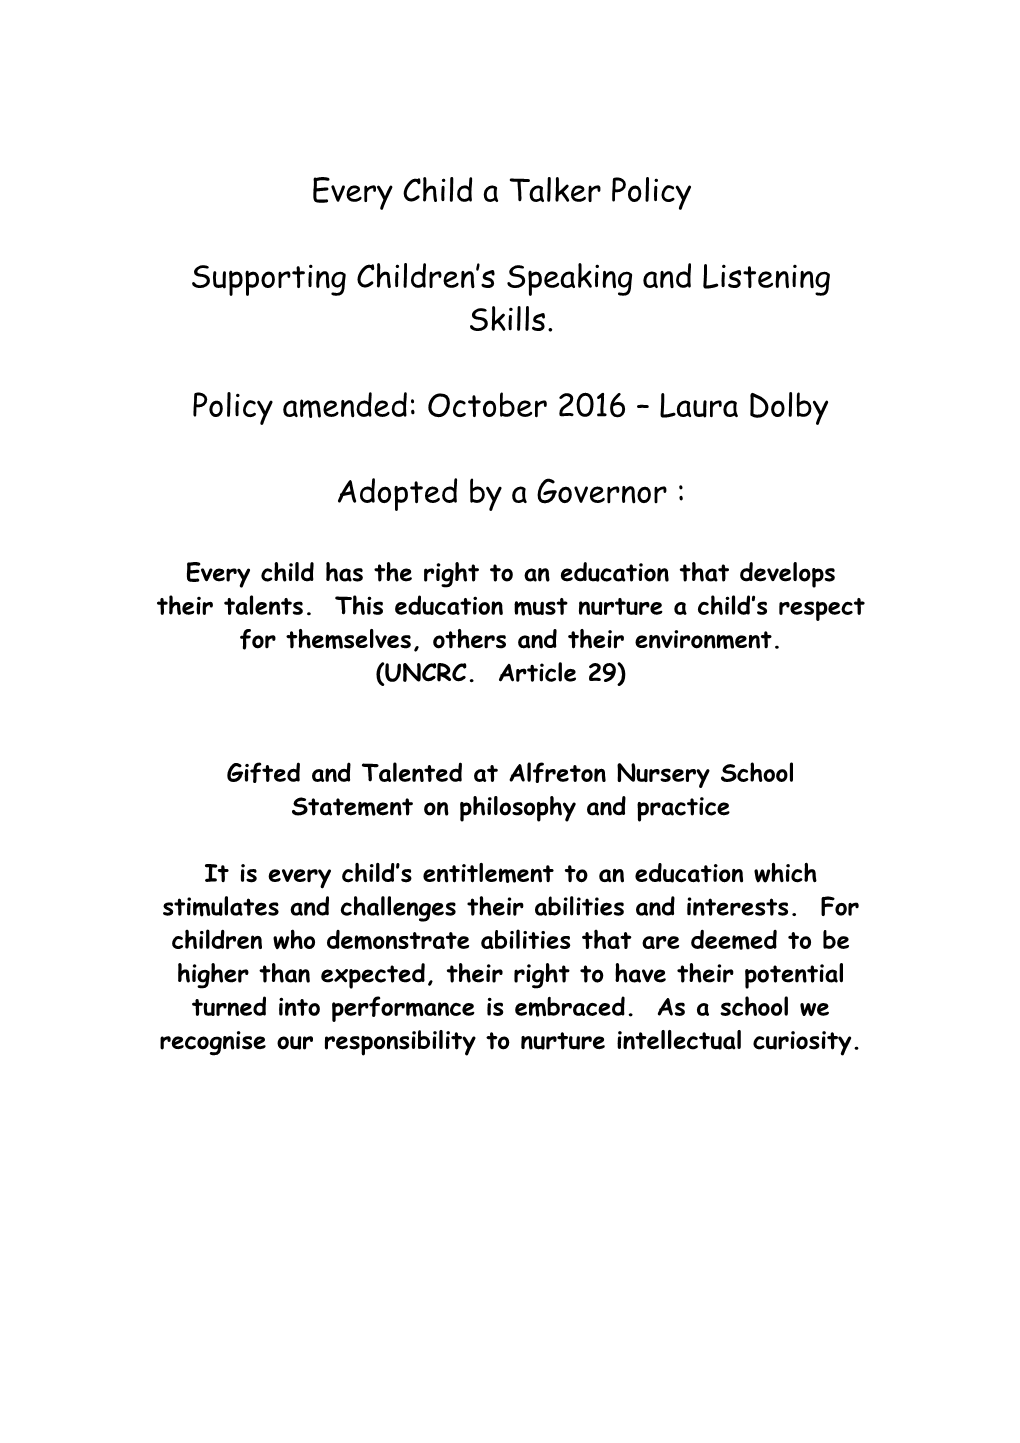 Every Child a Talker Policy